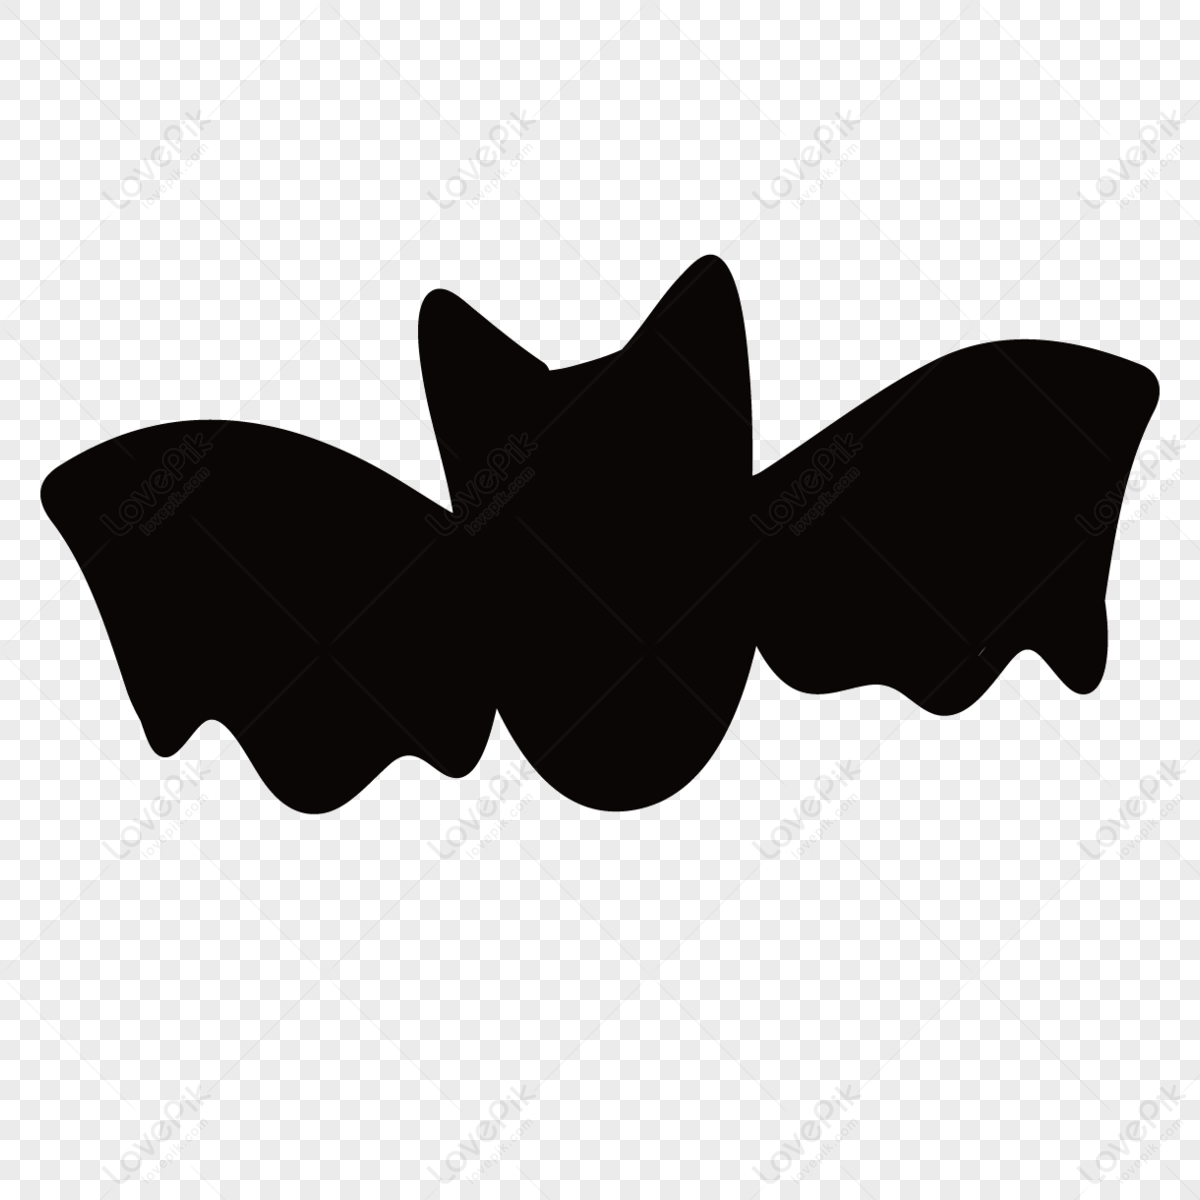 Bat Graphic PNG Images With Transparent Background | Free Download On ...